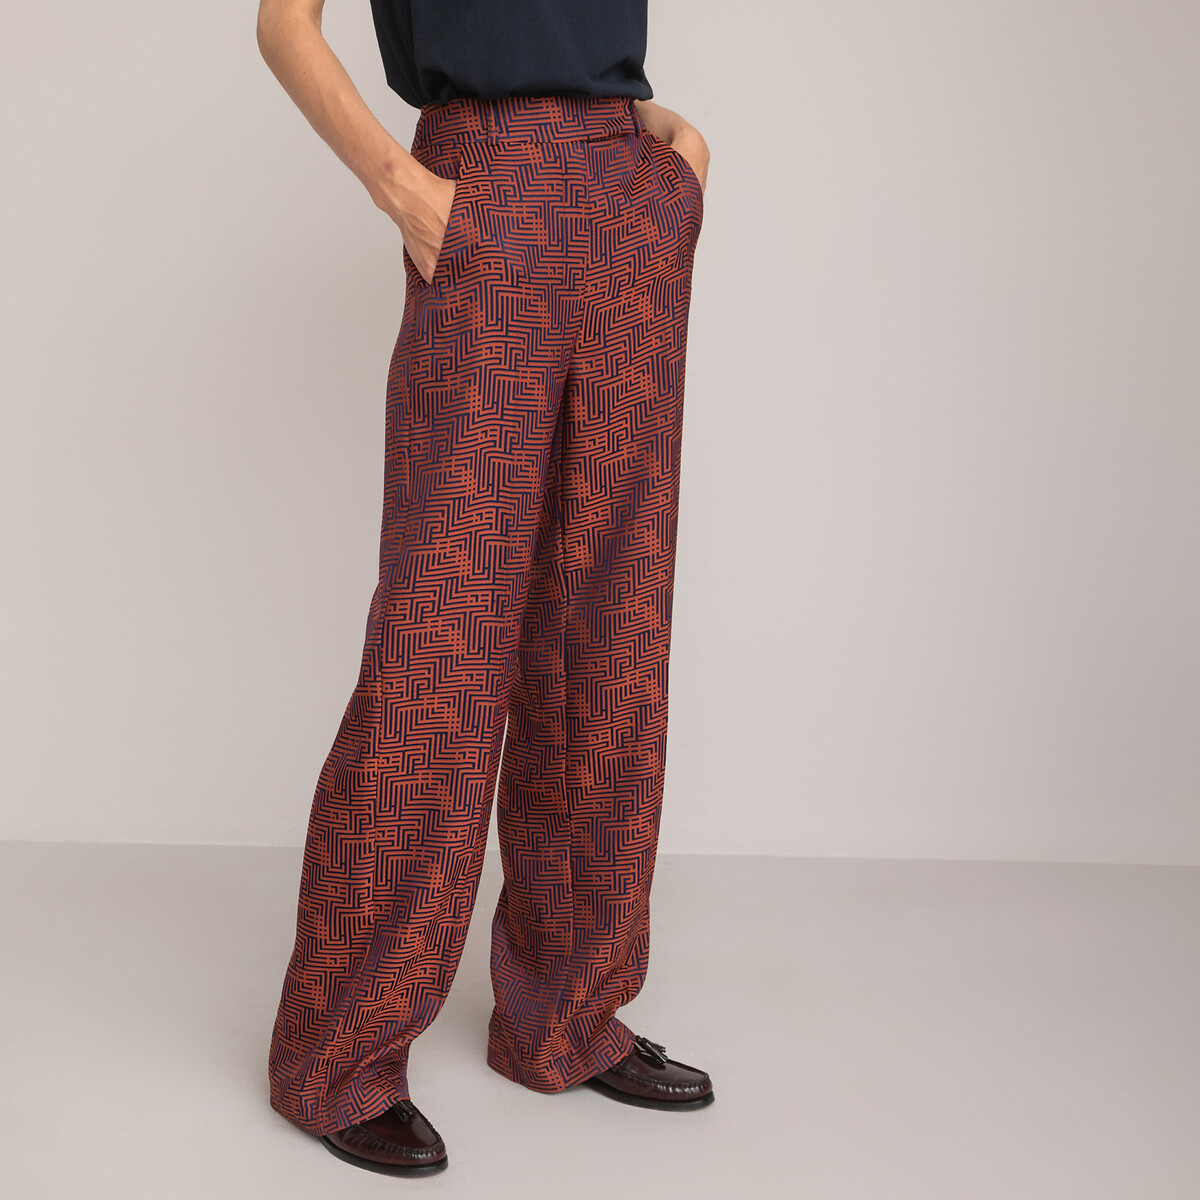 Wide Leg Trousers in Graphic Print Jacquard, Length 31.5"